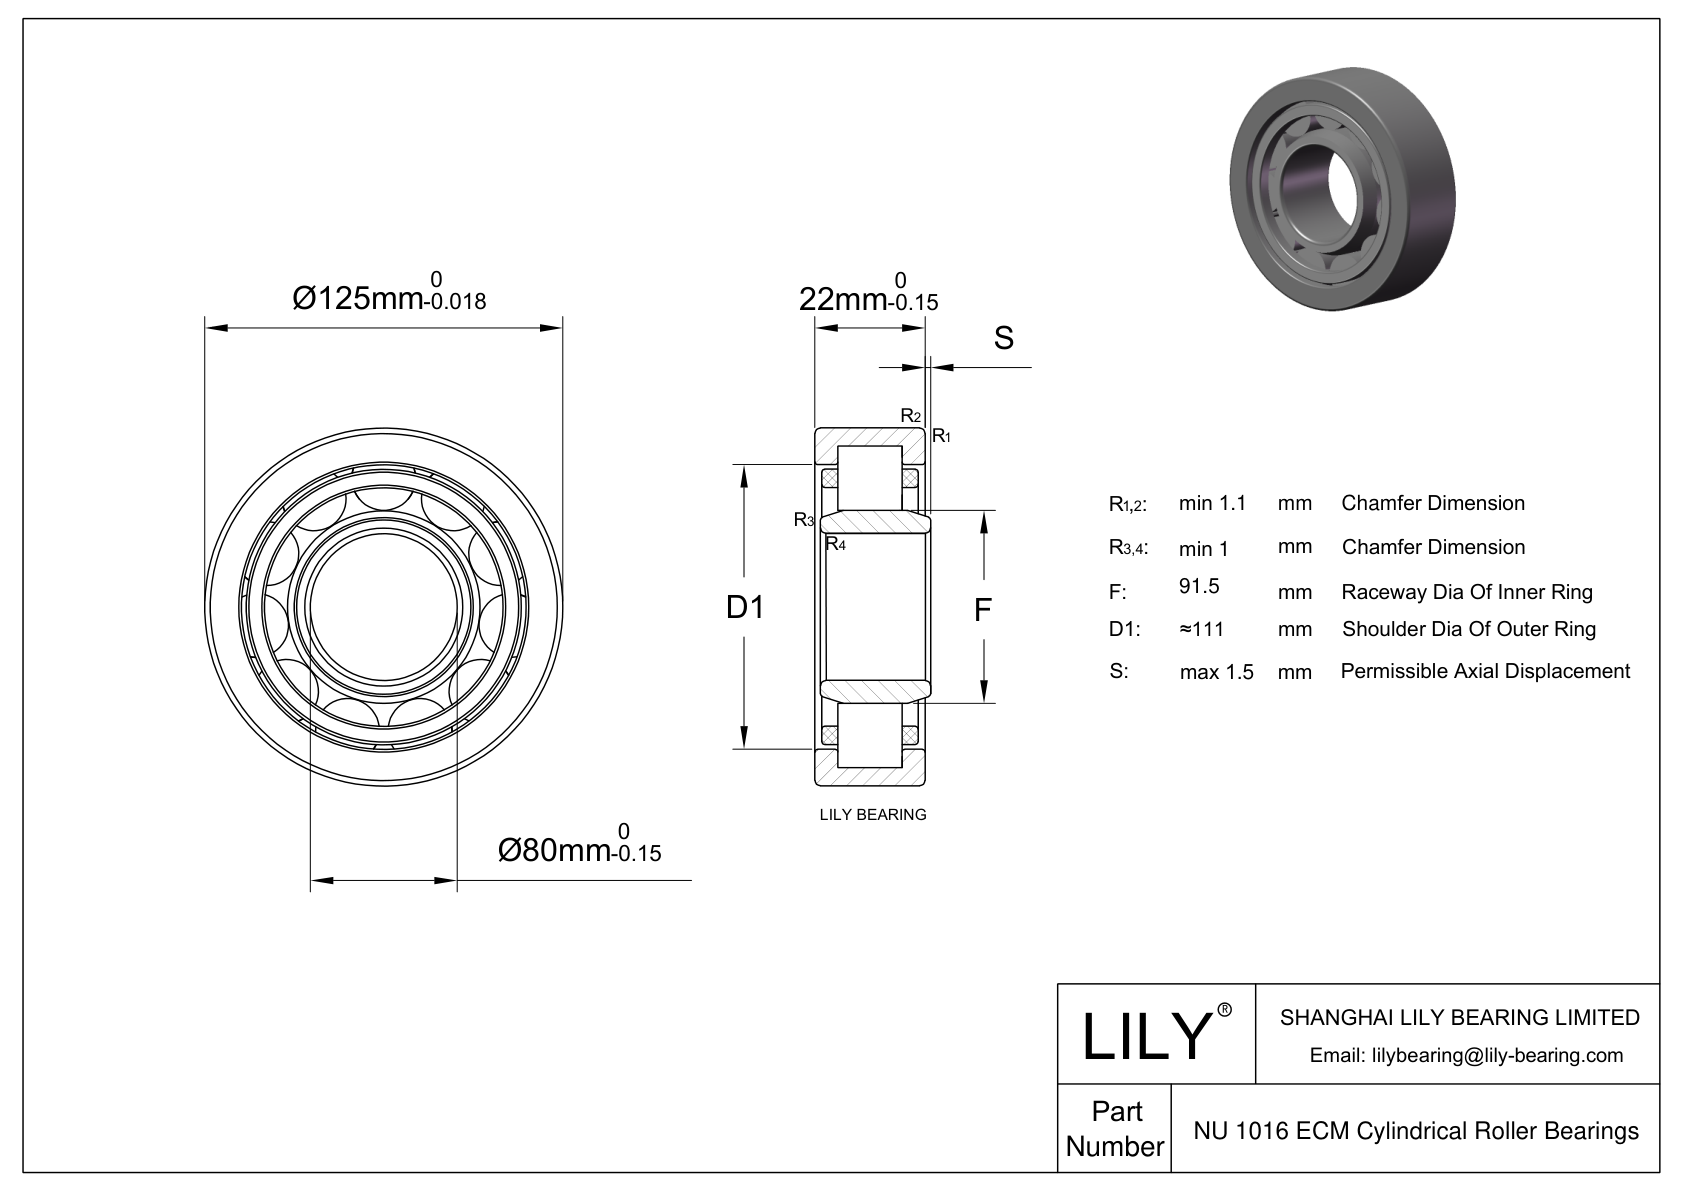 NU 1016 ECM/C3VL0241 Ceramic Coated Cylindrical Roller Bearings cad drawing